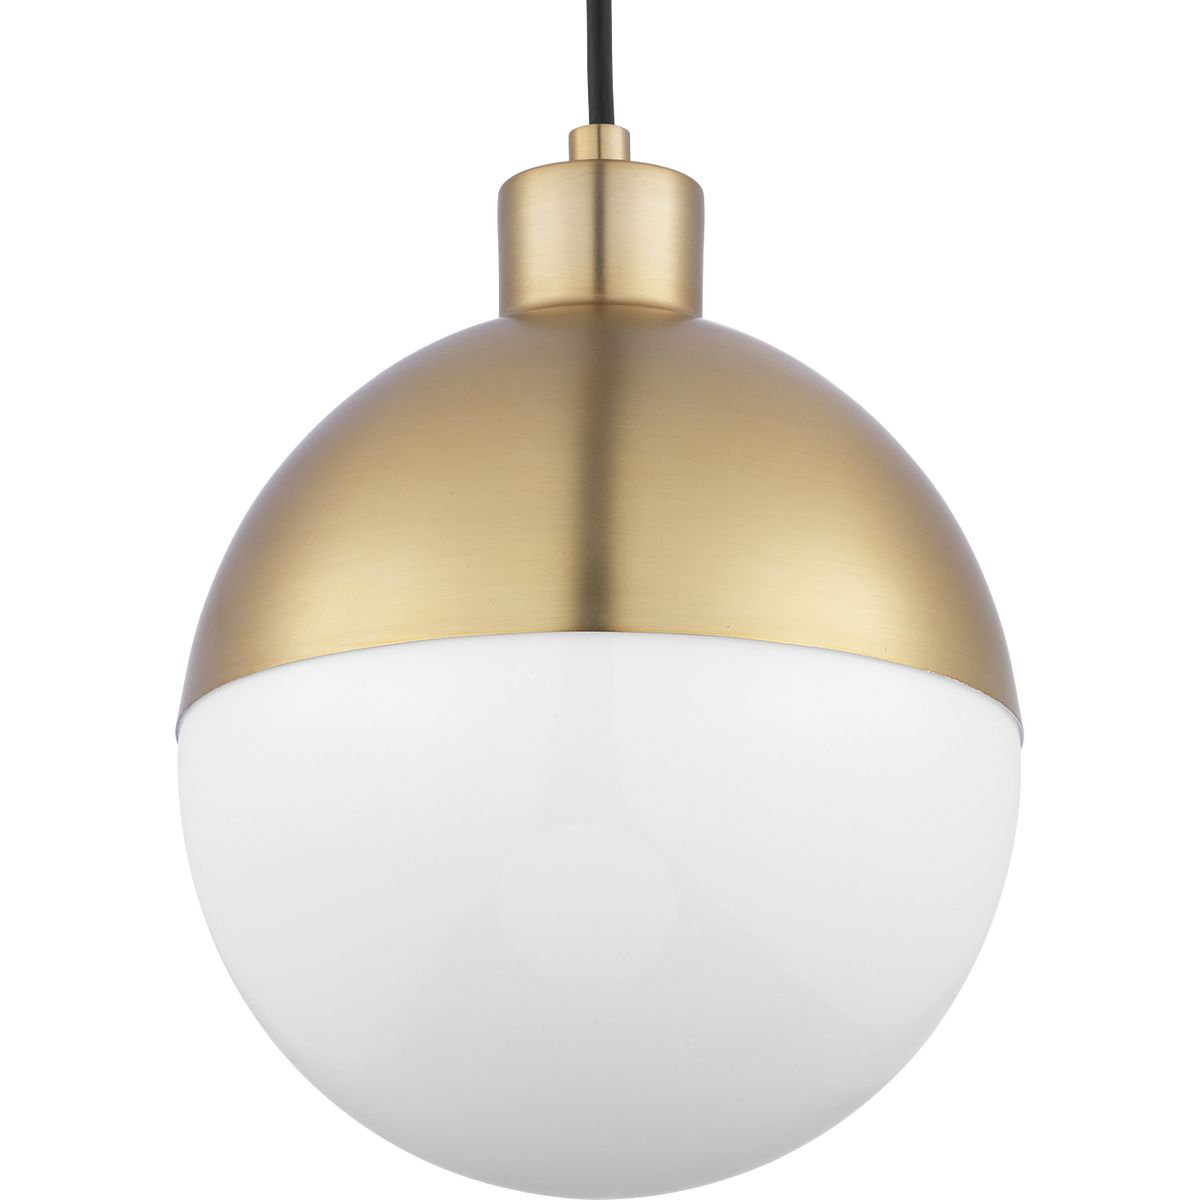 Distinctive Classic globe pendants are accented by striking metal caps over an opal glass shade. This pendant is ideal for Modern, Mid-Century or Farmhouse interior design styles. These versatile pendants can be displayed singularly or in groupings of two or more by mixing and matching finish options and lengths to create custom lighting designs for the home. Complimented by a Brushed Bronze finish.